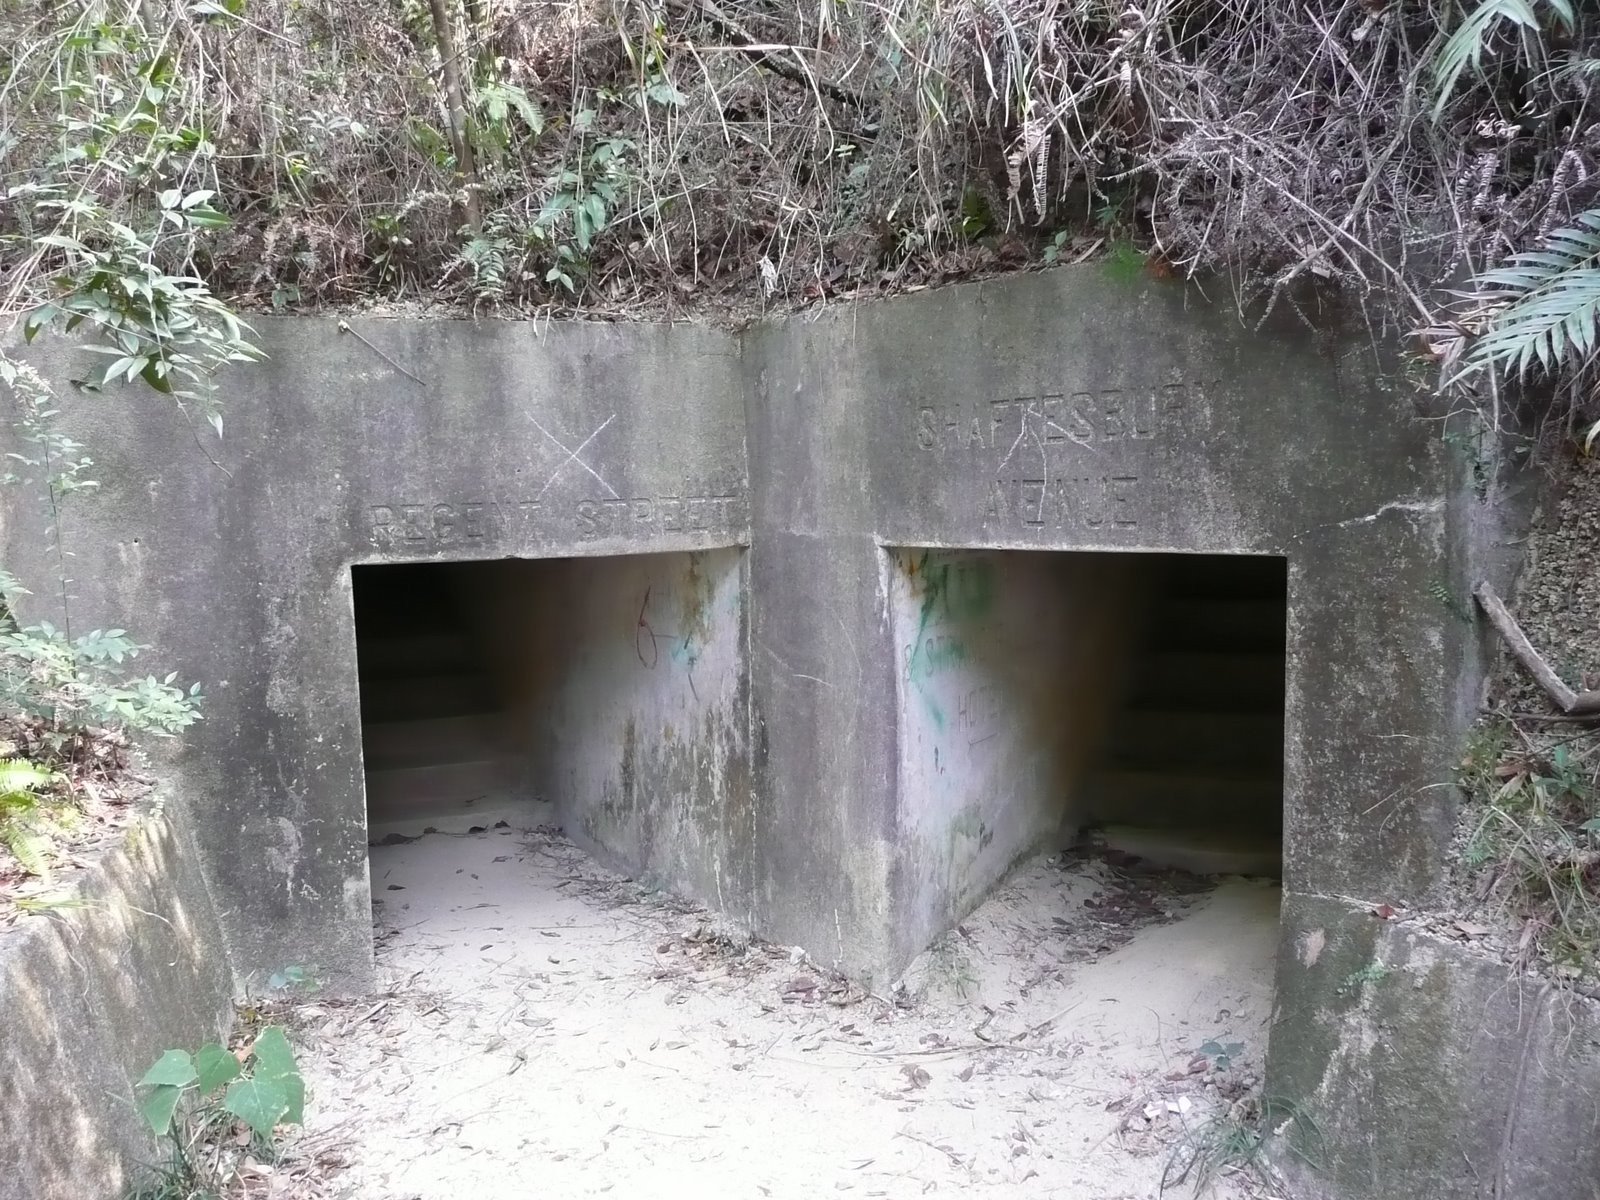 Tunnels labelled Regent Street and Shaftesbury Avenue, part of Shing Mun Redoubt, a second world war defensive line in Hong Kong’s New Territories. Ironically given the tunnels’ London landmark nicknames, it was Scottish troops who occupied them in 1941. Photo: Handout